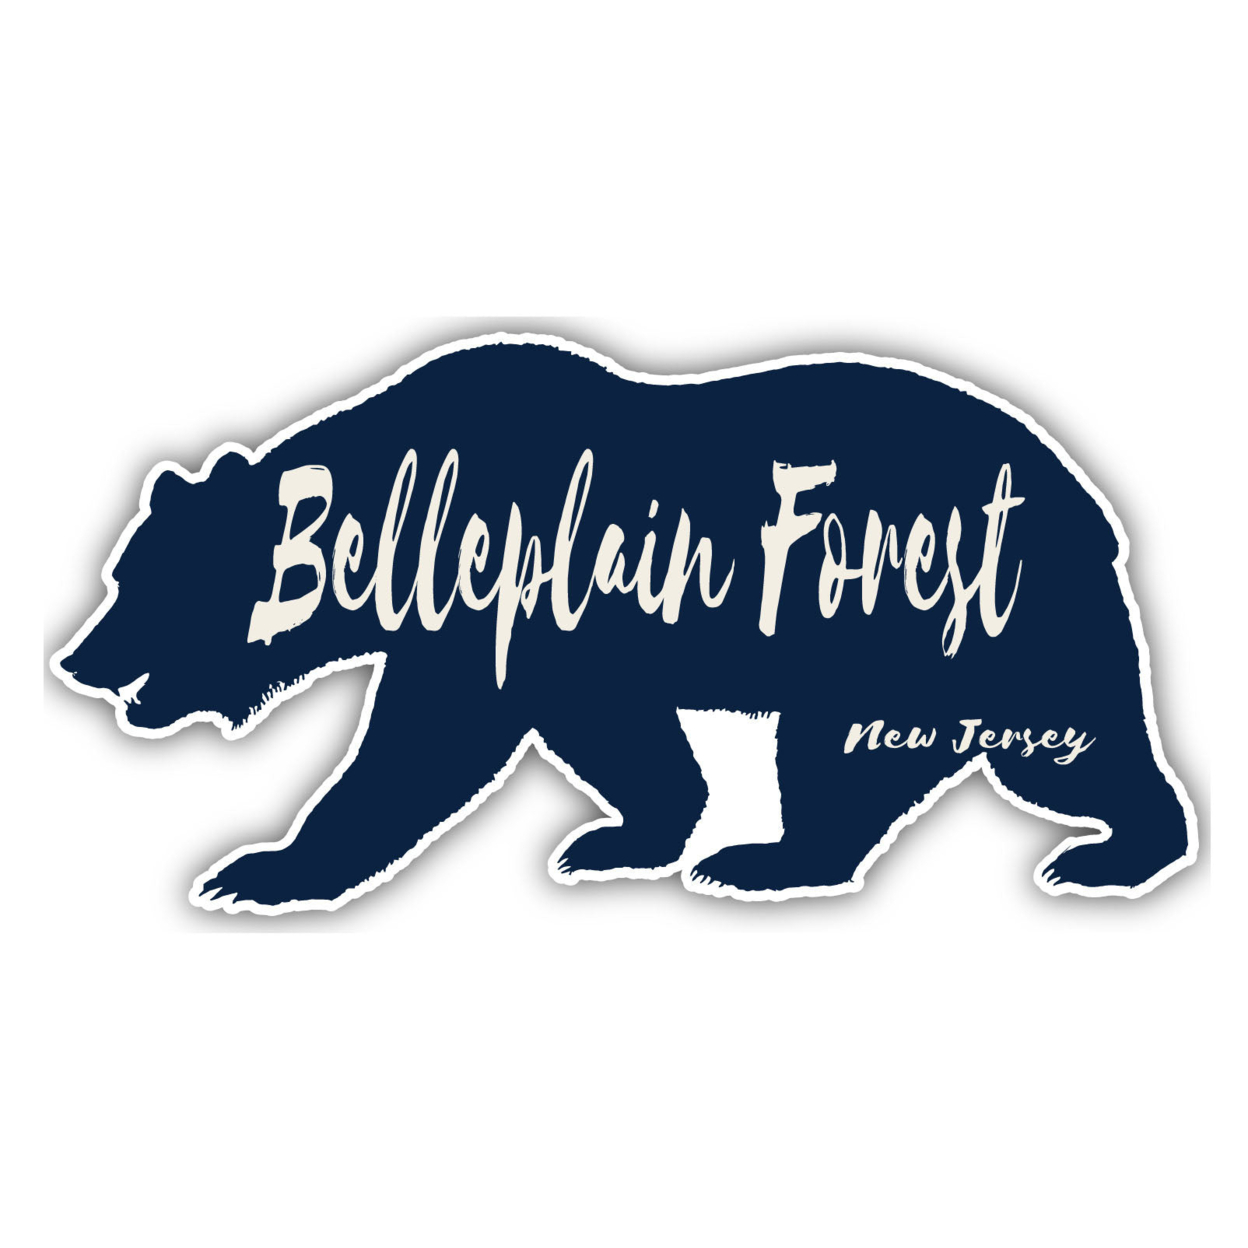 Belleplain Forest New Jersey Souvenir Decorative Stickers (Choose Theme And Size) - 4-Pack, 4-Inch, Bear